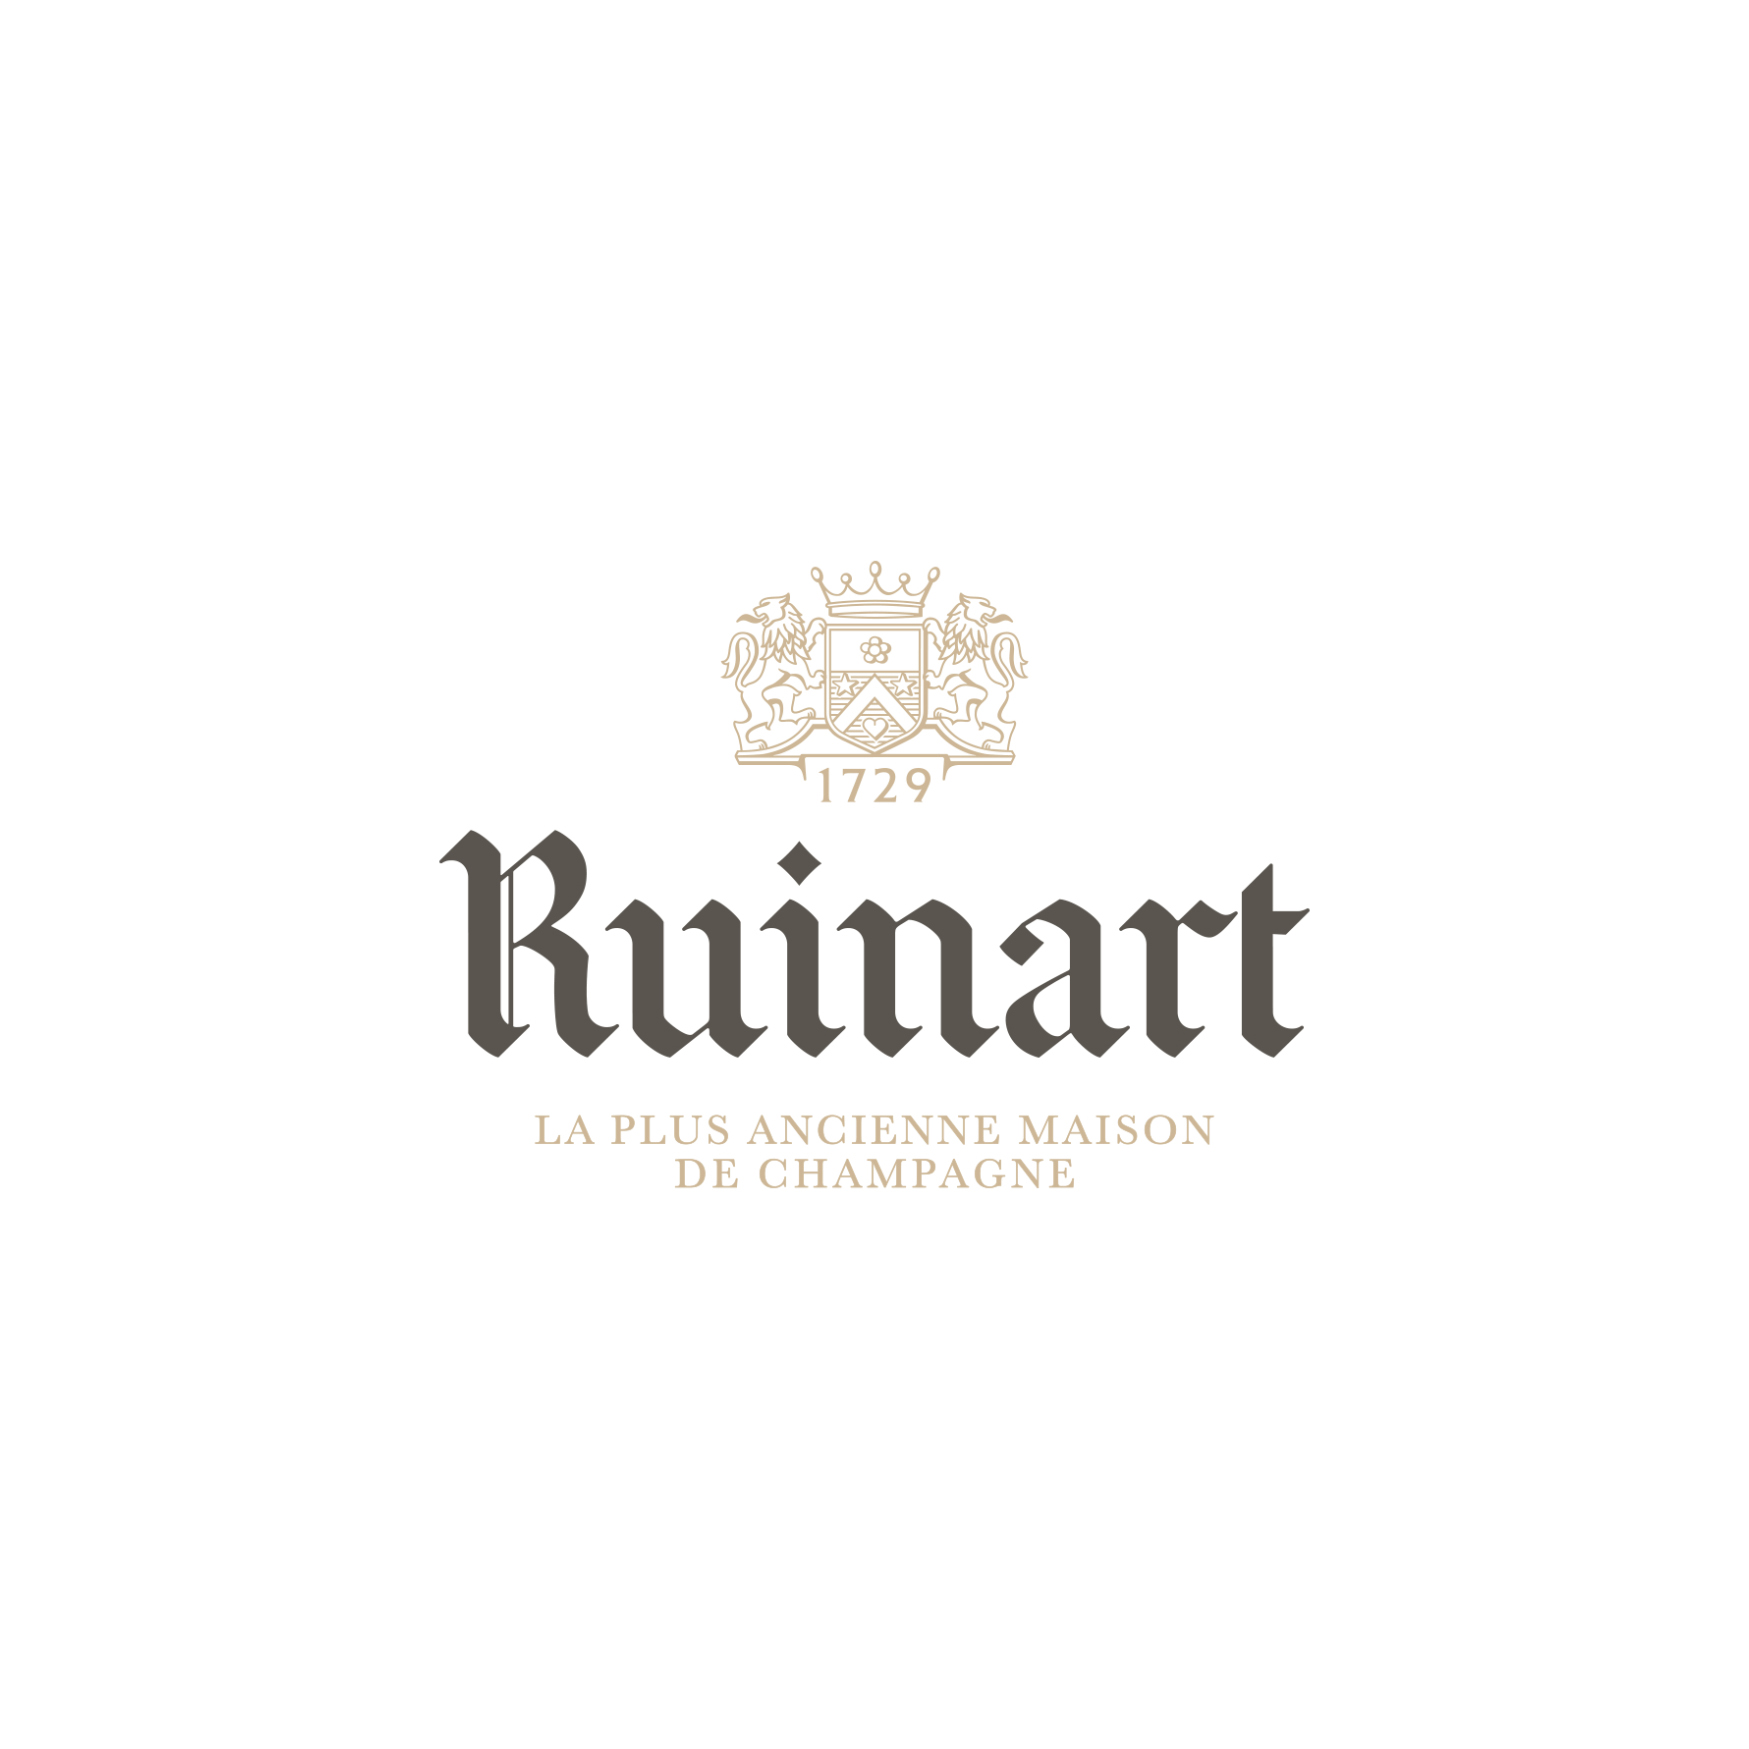 Supported by Ruinart (MHD Moët Hennessy Diageo)